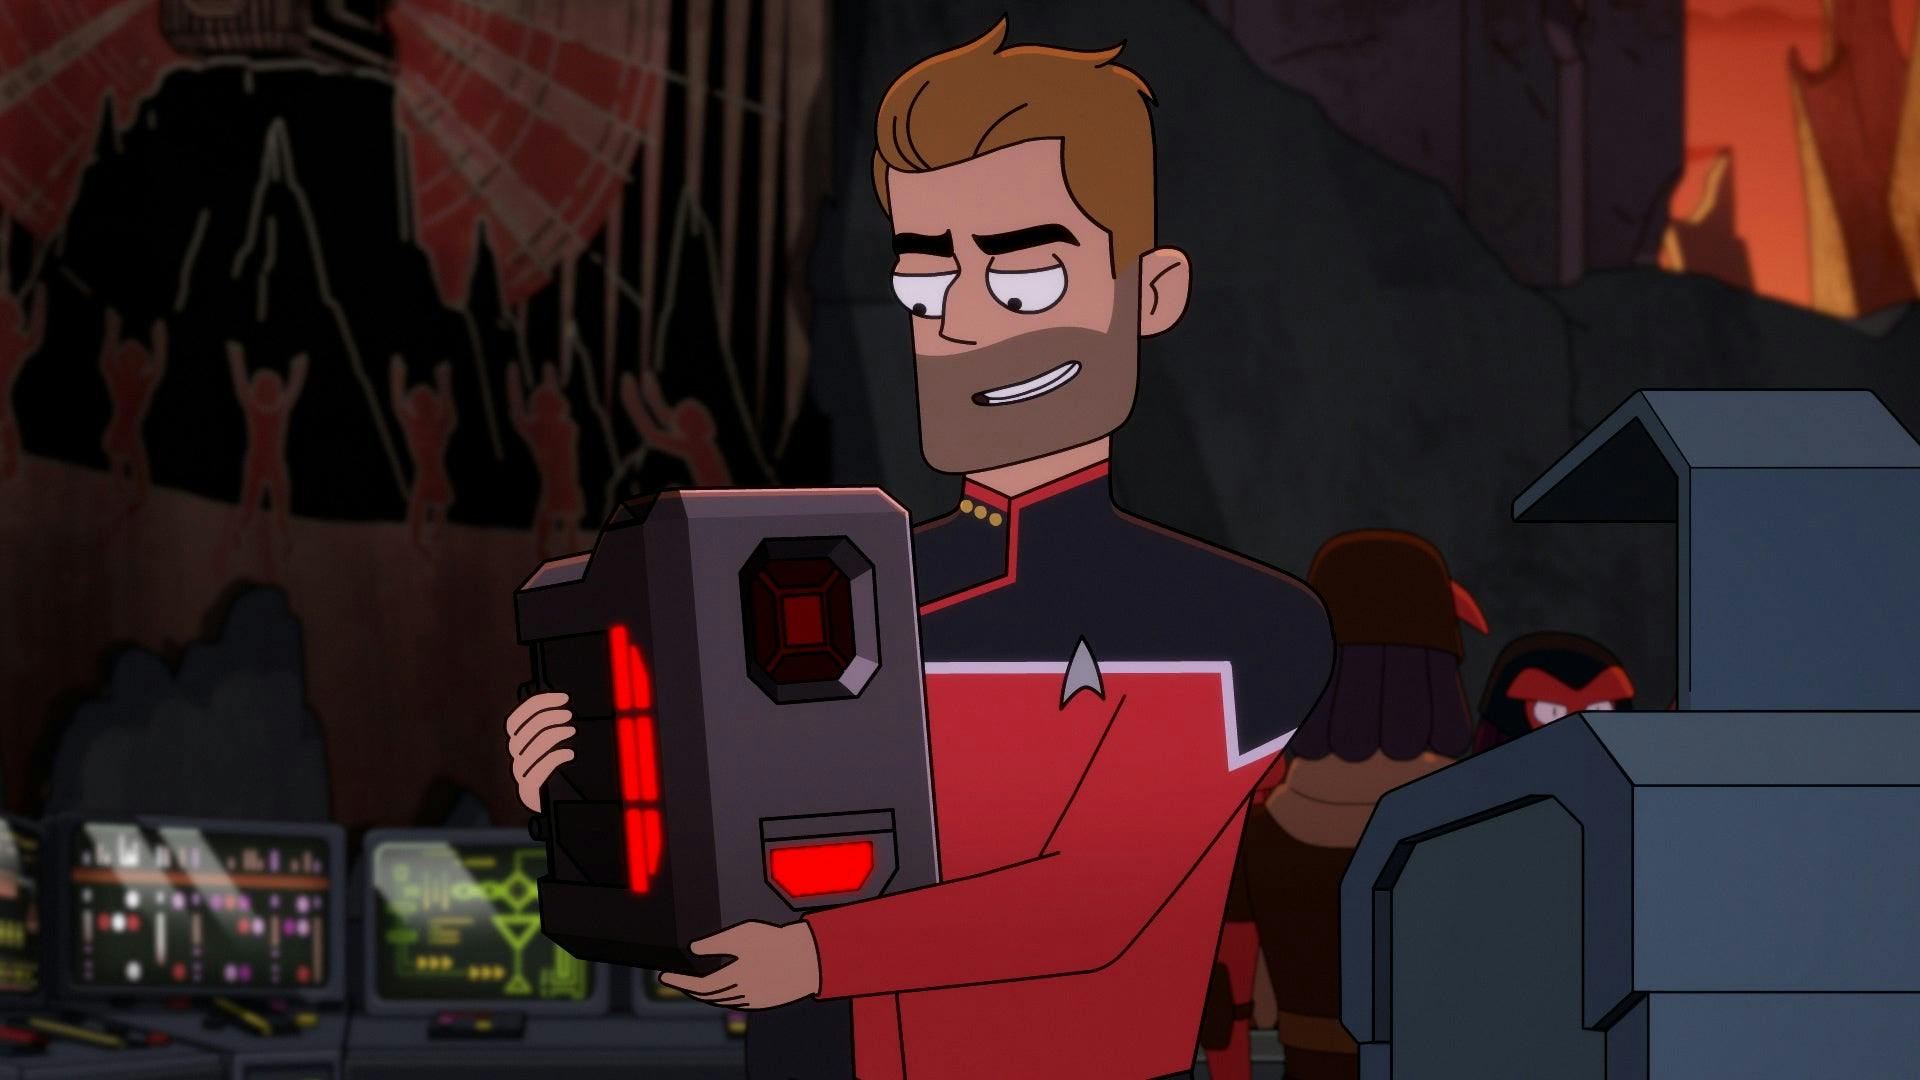 The evil computer Agimus poses a question to Commander Jack Ransom.